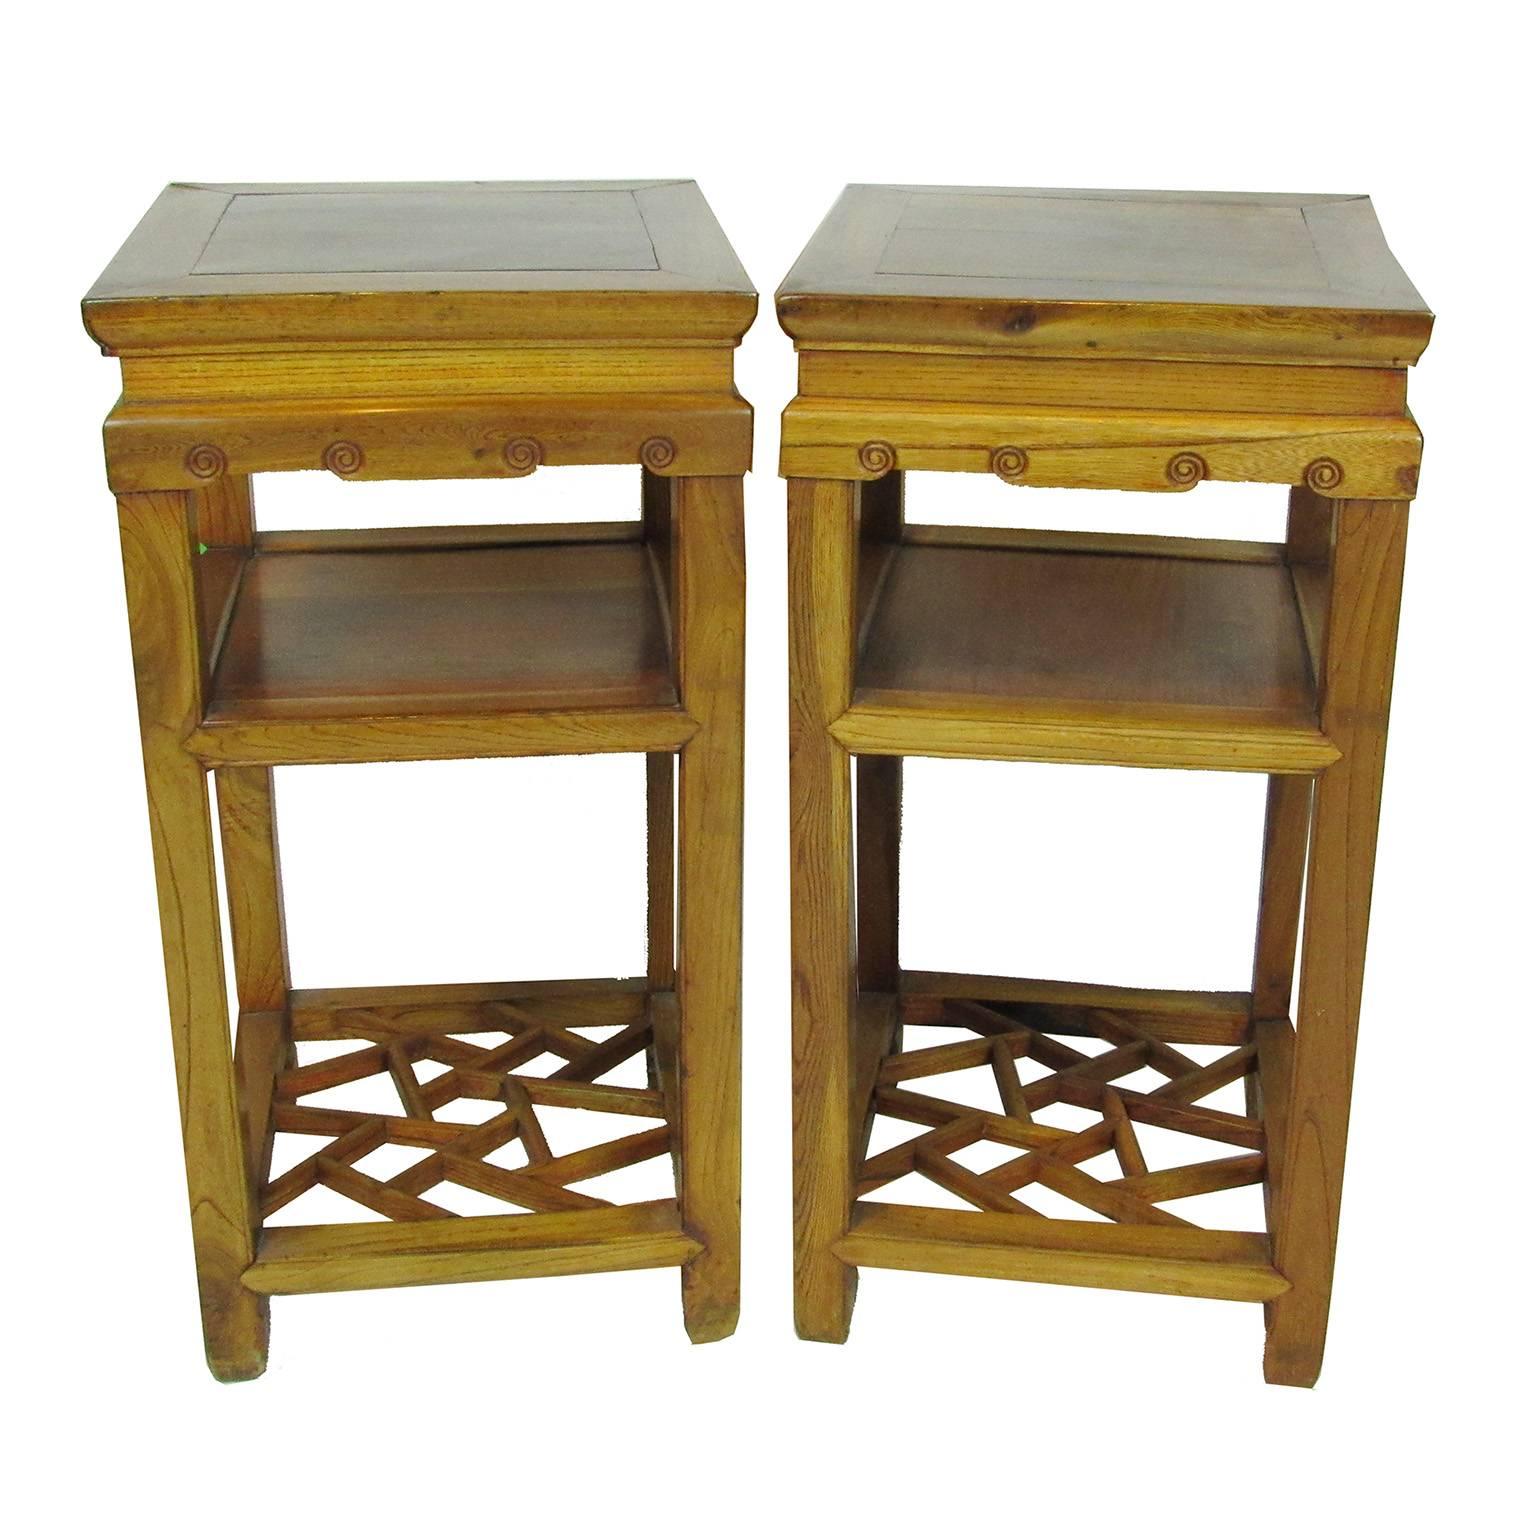 Antique pair of elmwood (Jumu) Chinese carved side tables or stands, 19th century. Traditional 